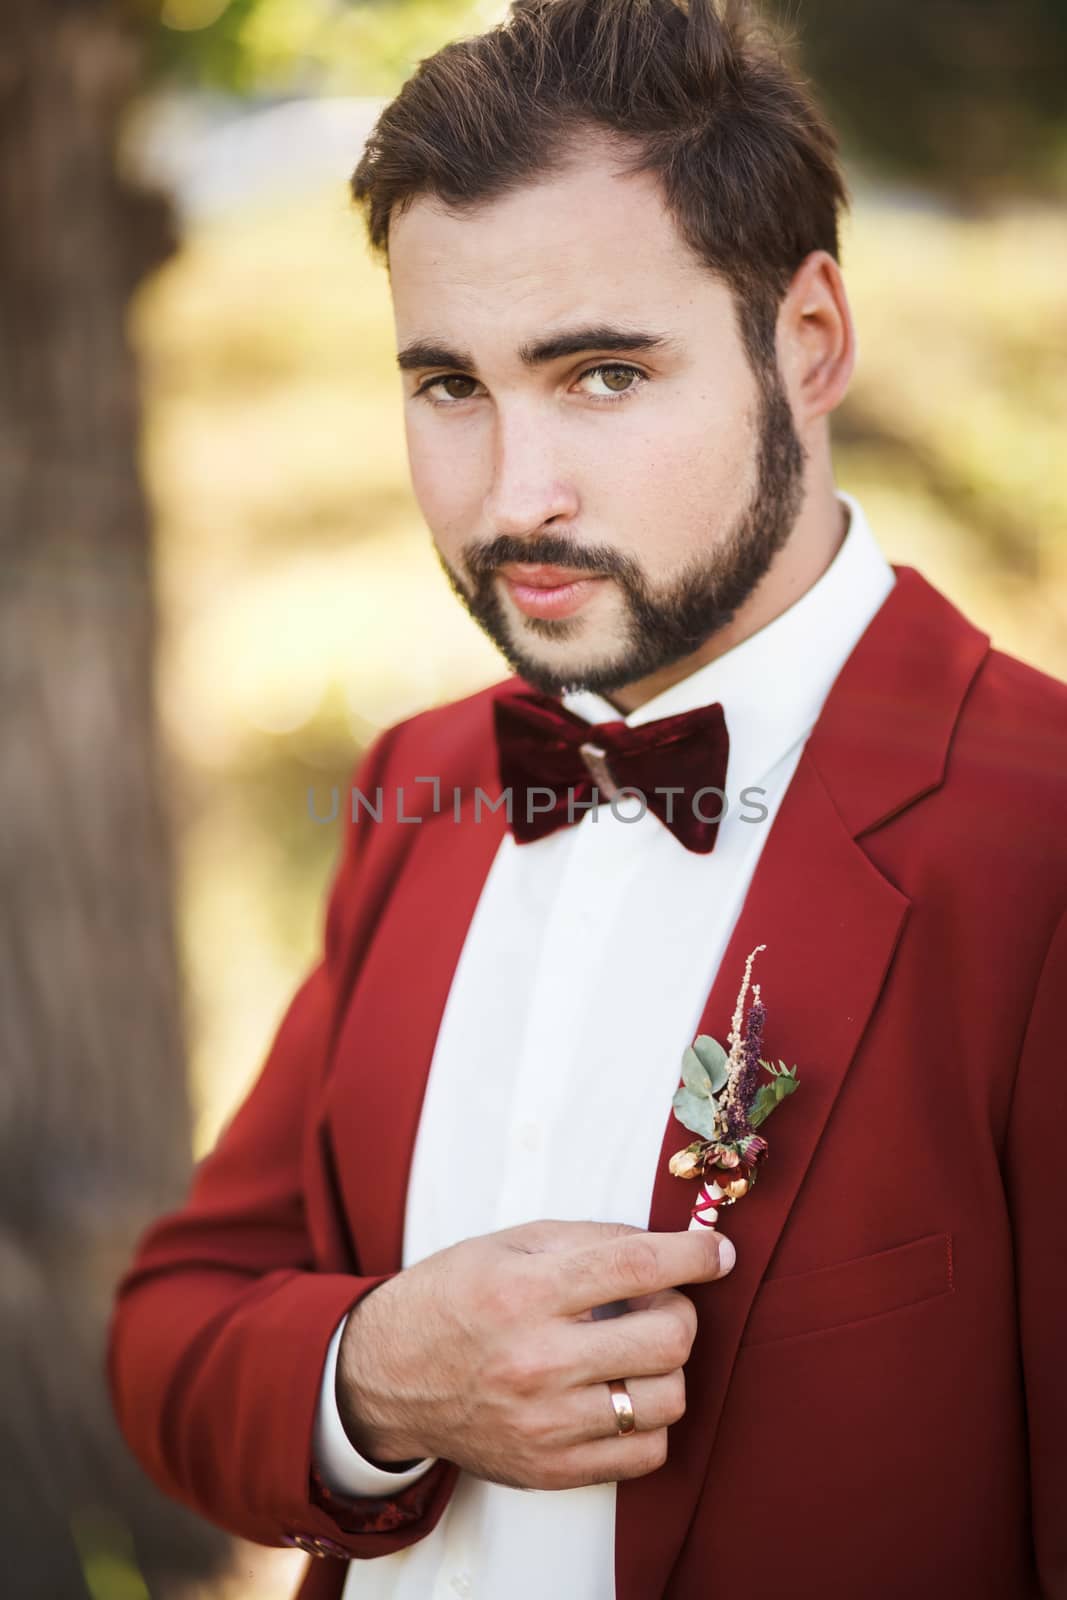 Portrait of the groom in a red suit with a bow tie, beard and mustache.